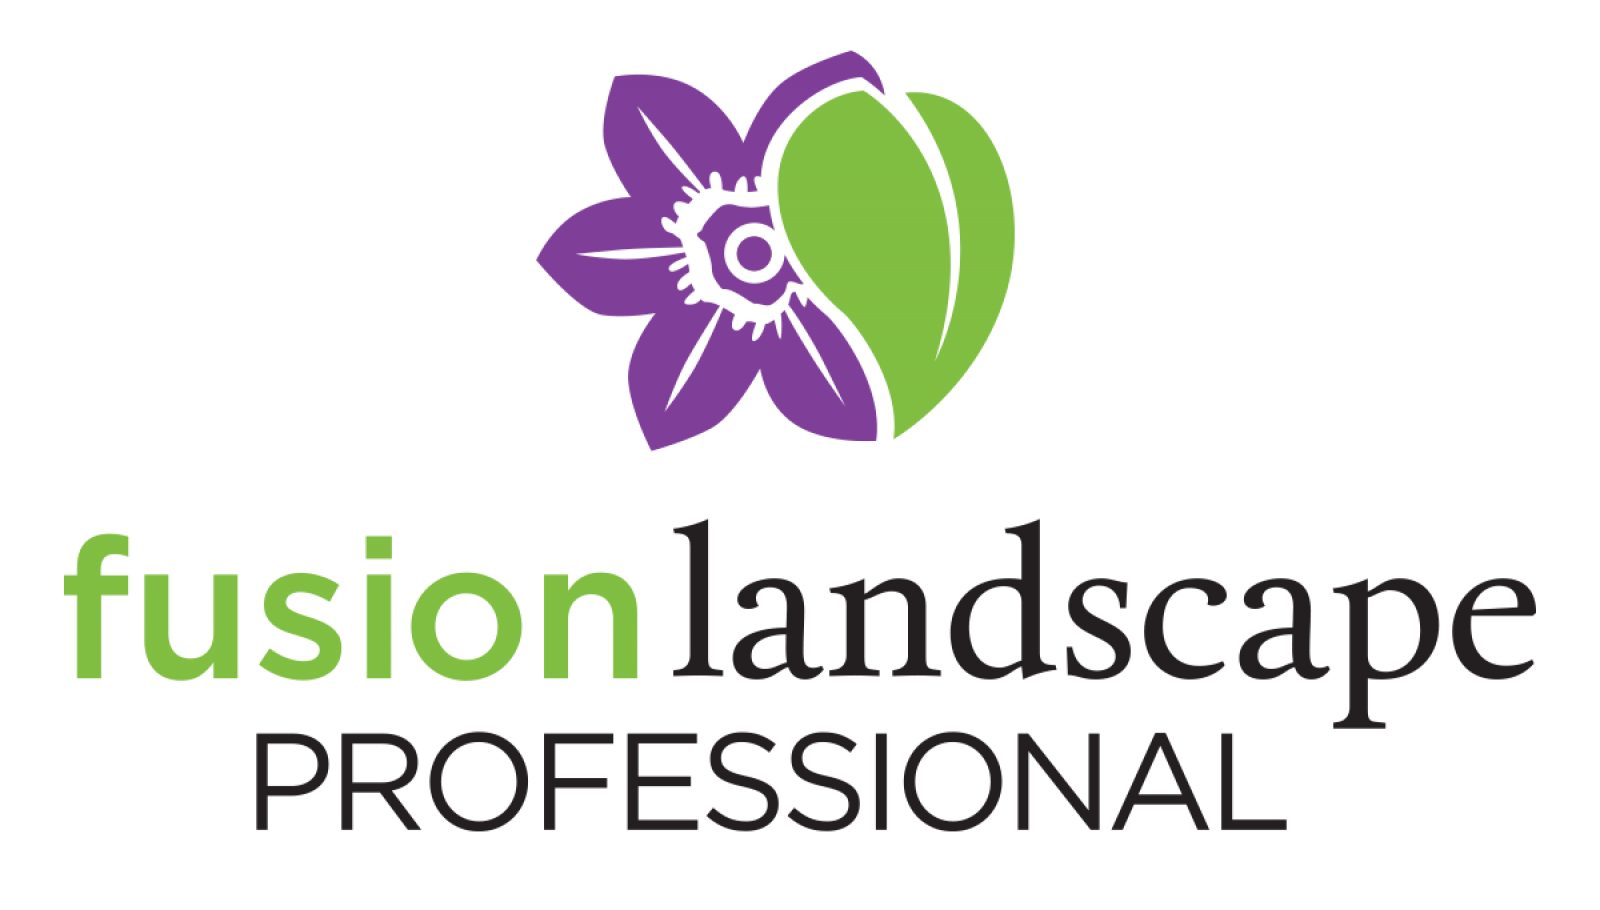 Fusion Landscape Professional training offered in 2022